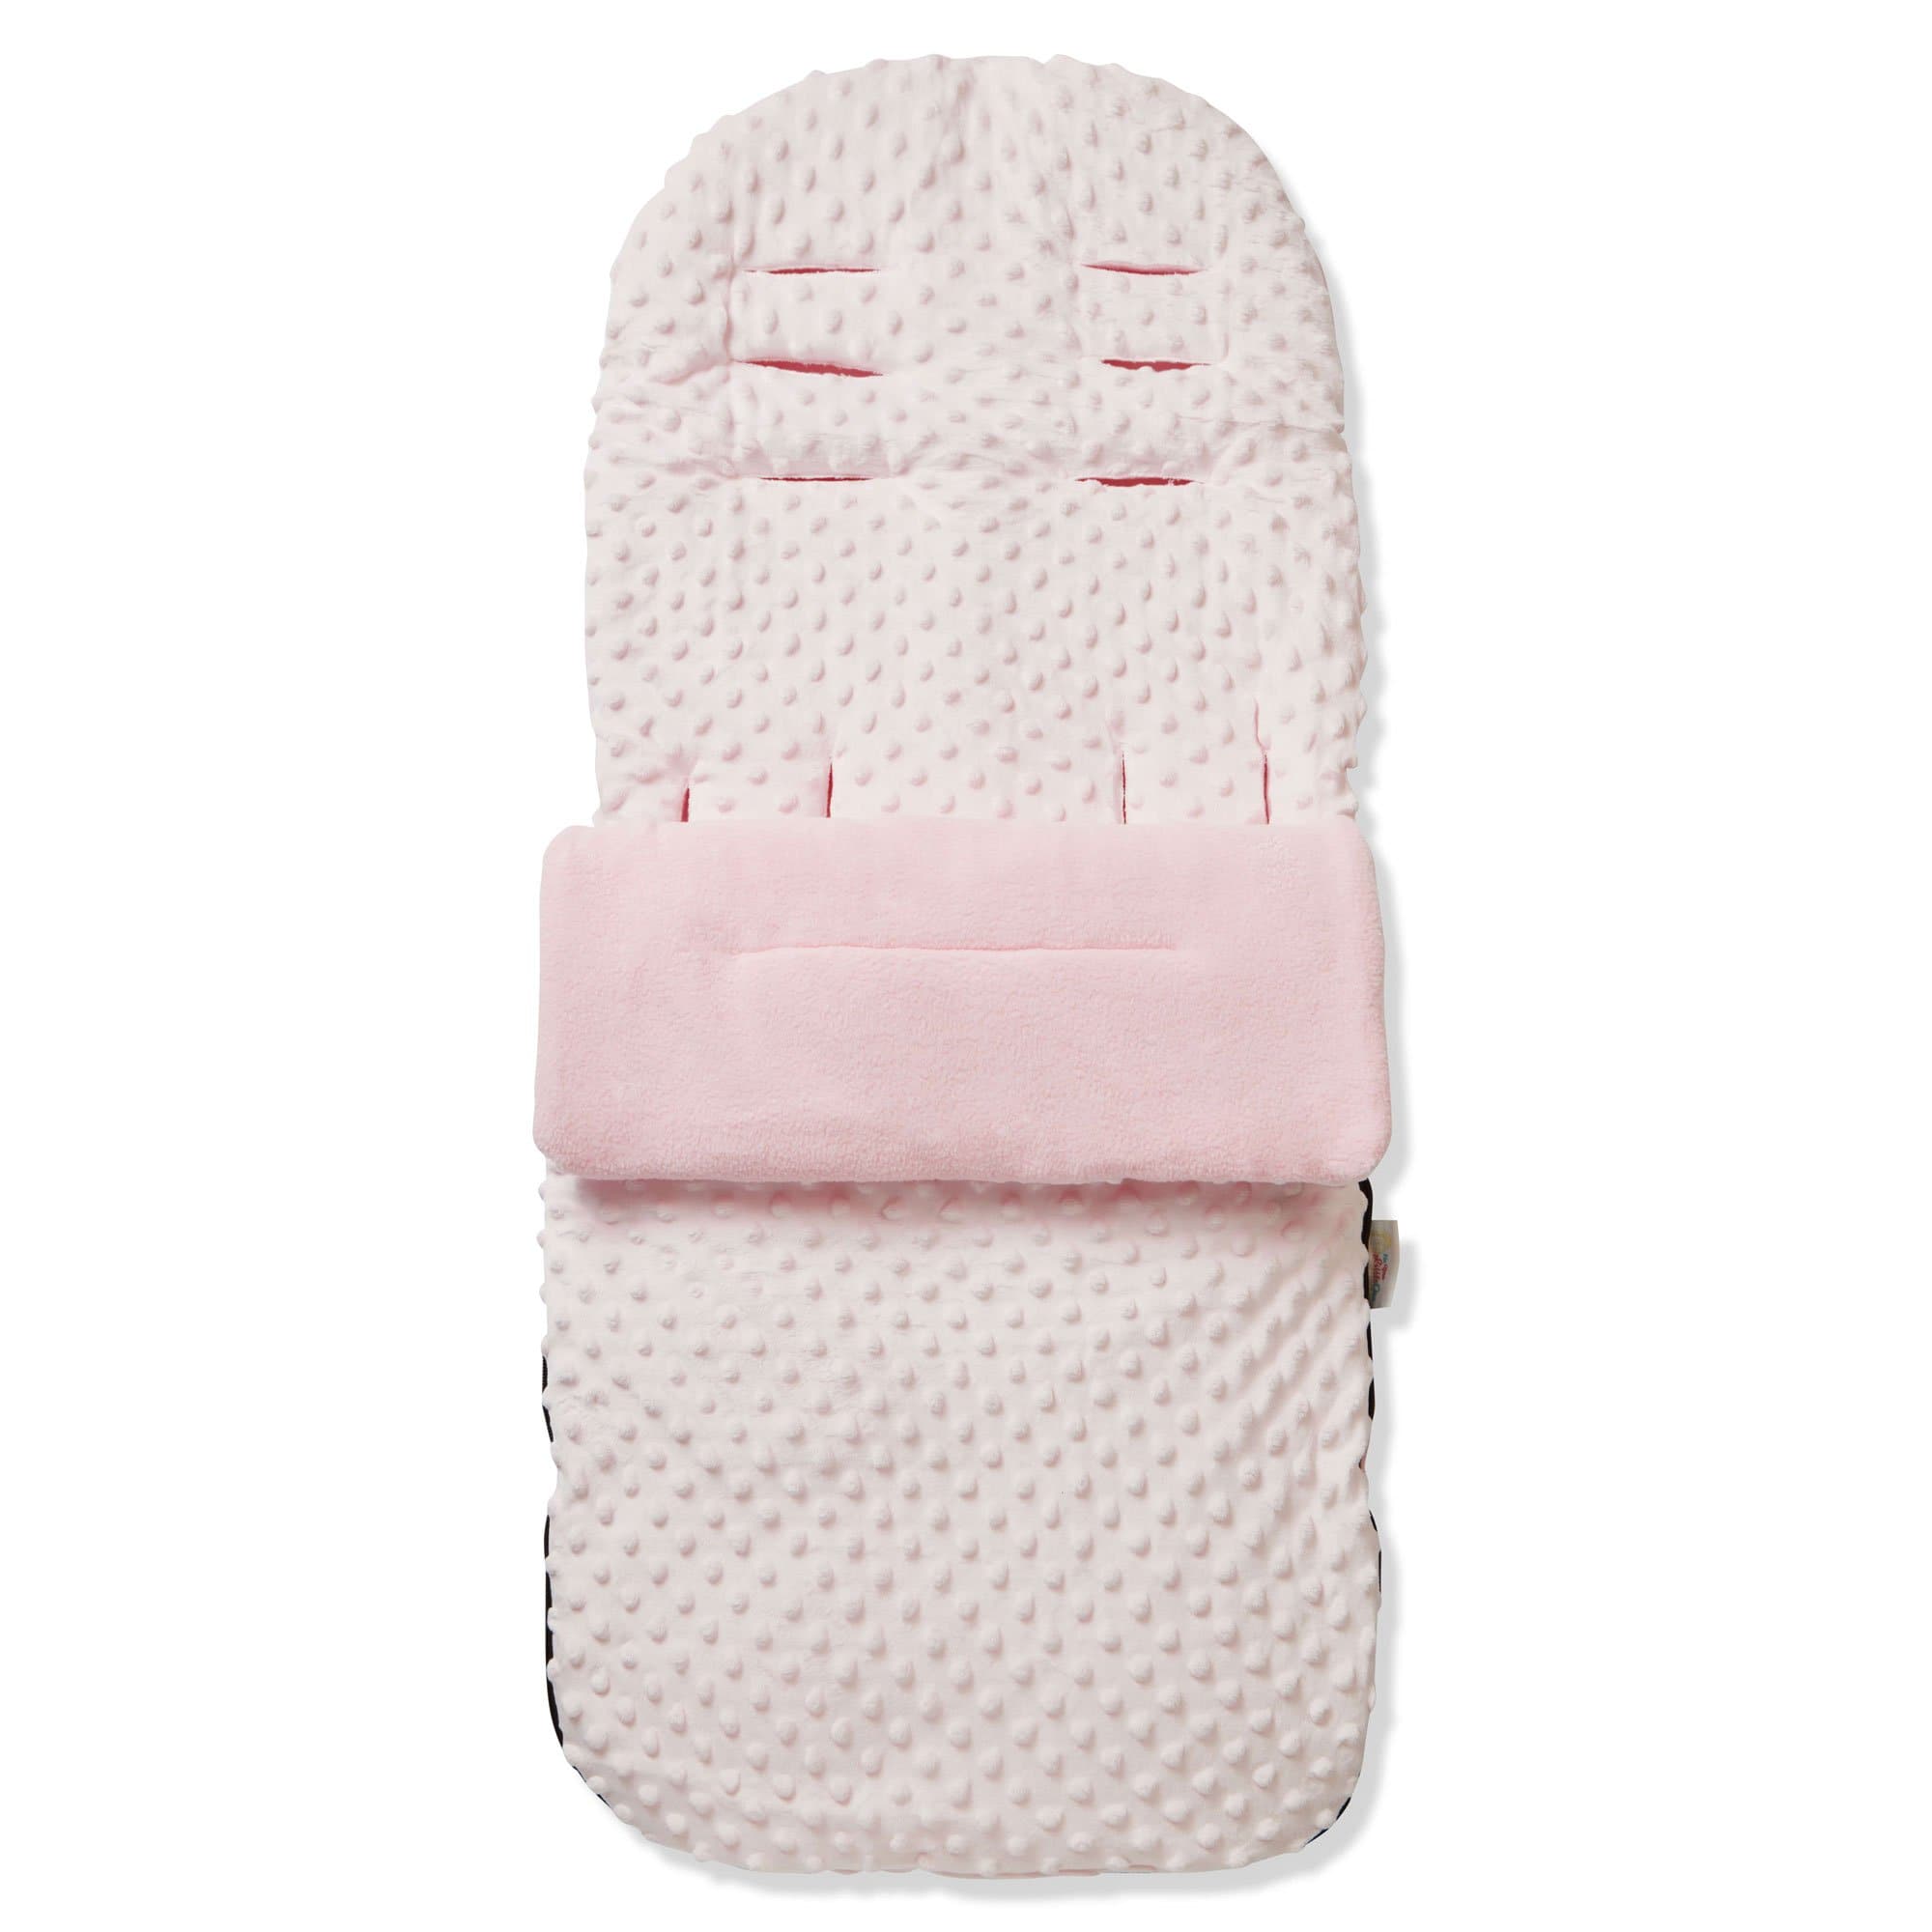 Dimple Footmuff / Cosy Toes Compatible with Valco - Pink / Fits All Models | For Your Little One